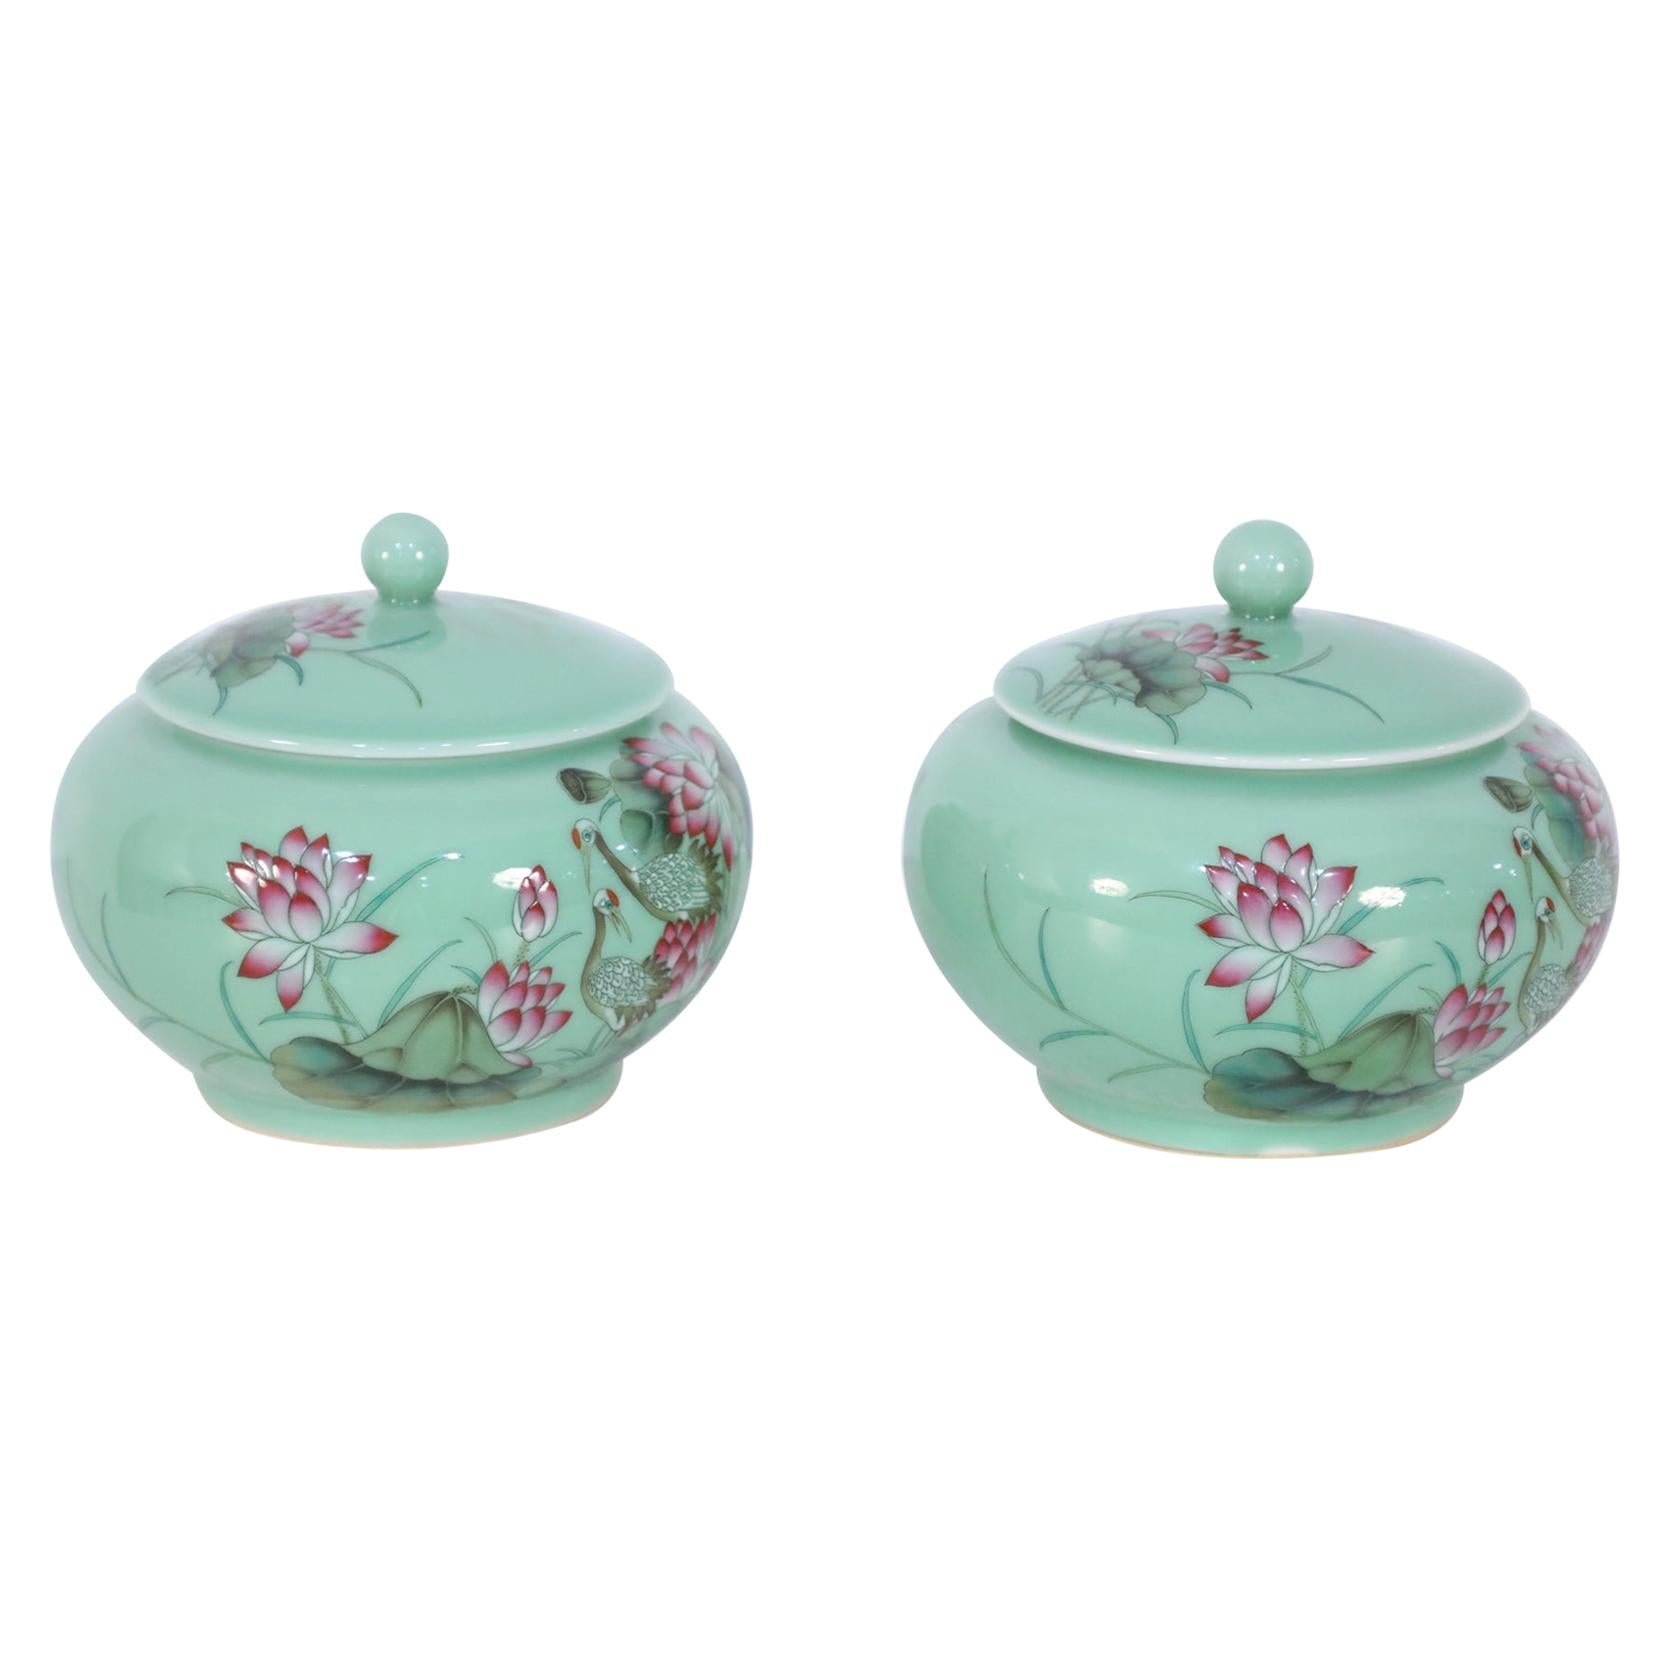 Pair of Chinese Pale Green and Pink Blossom Lidded Jars